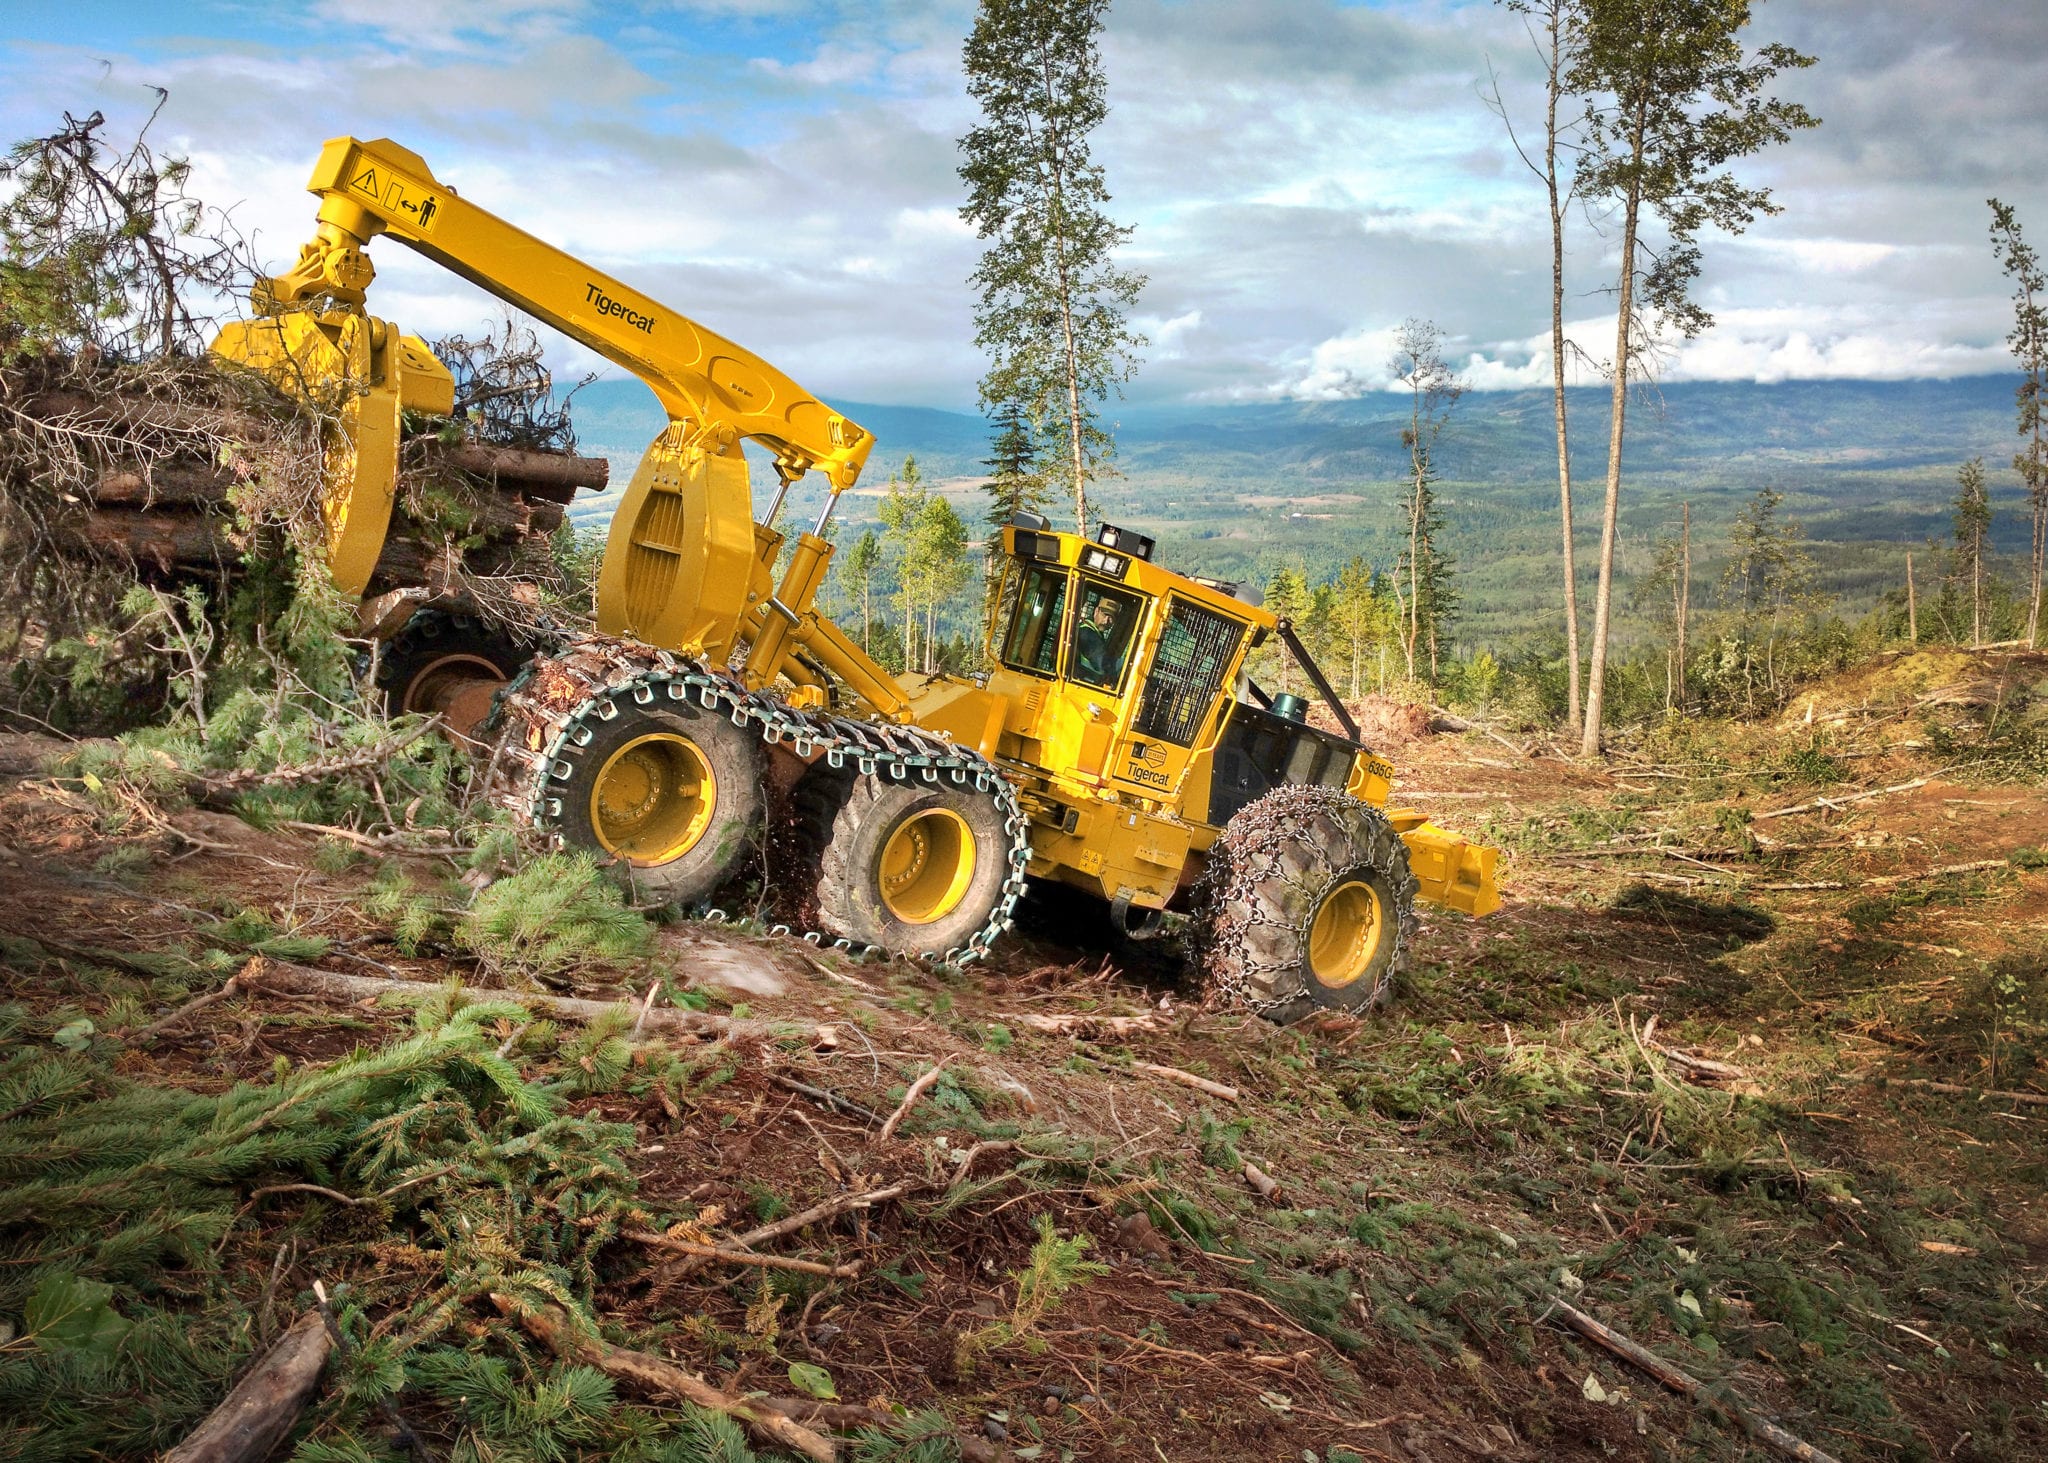 Forestry Equipment Supplier and Rentals